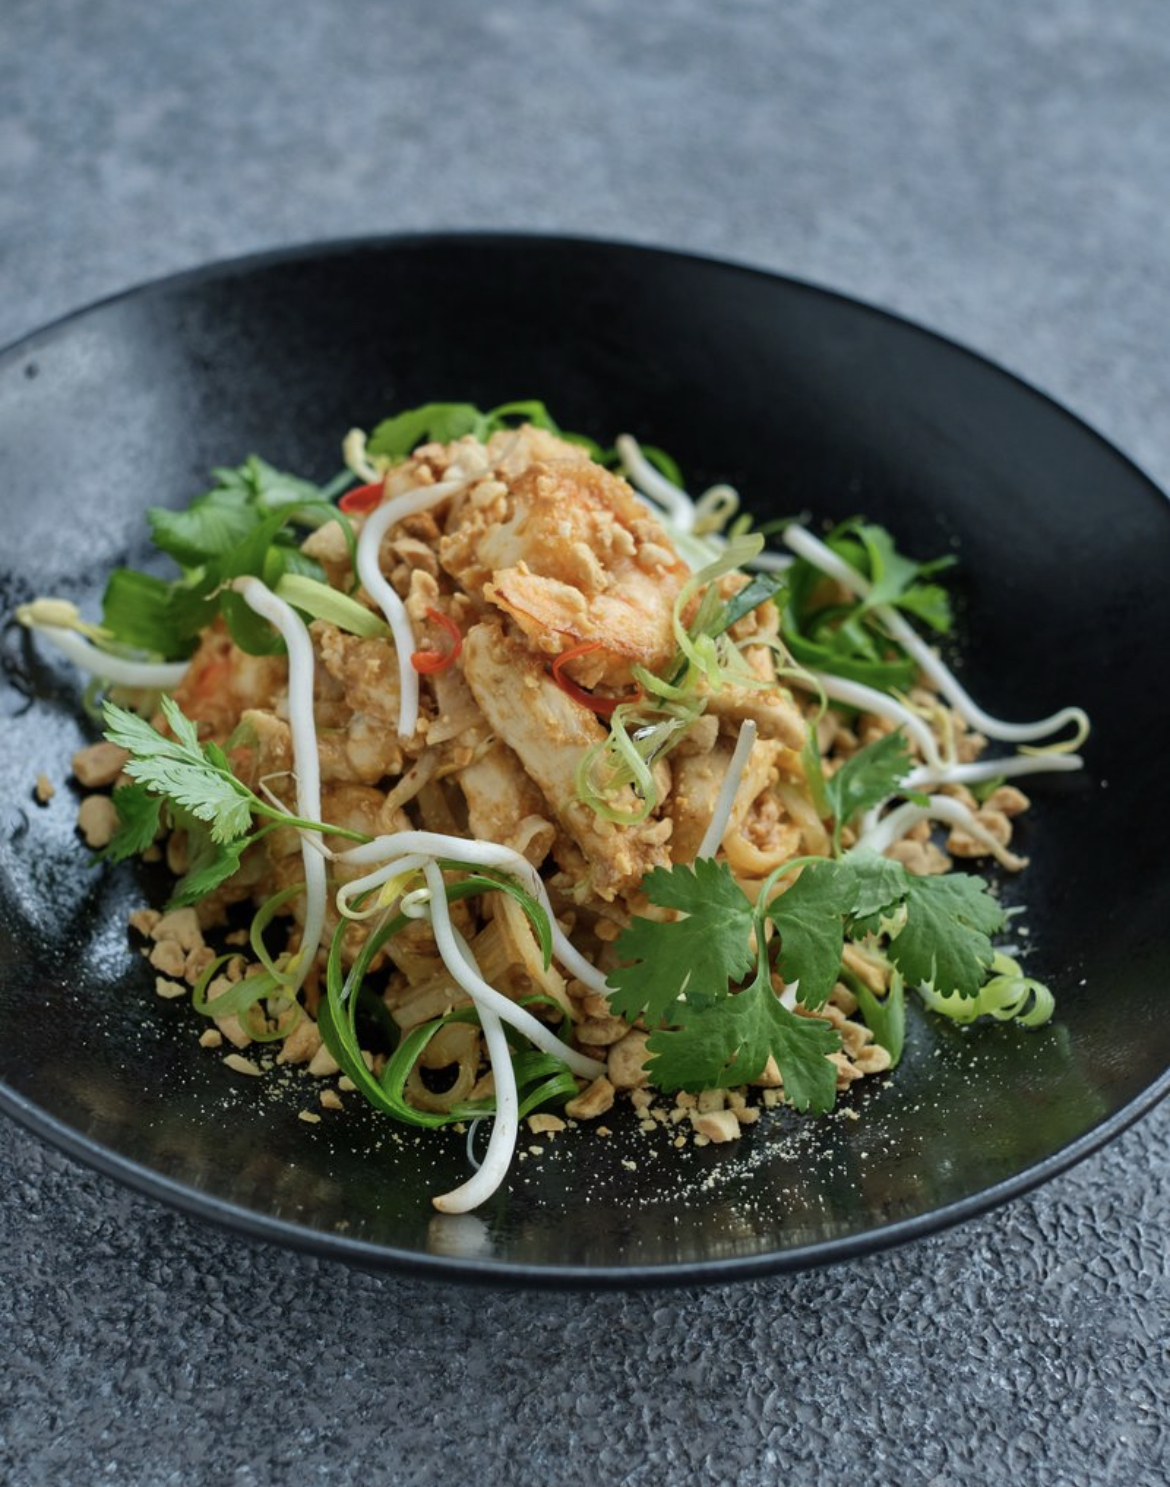 Rice noodles “pad thai” with prawns and chicken<br>400 g.